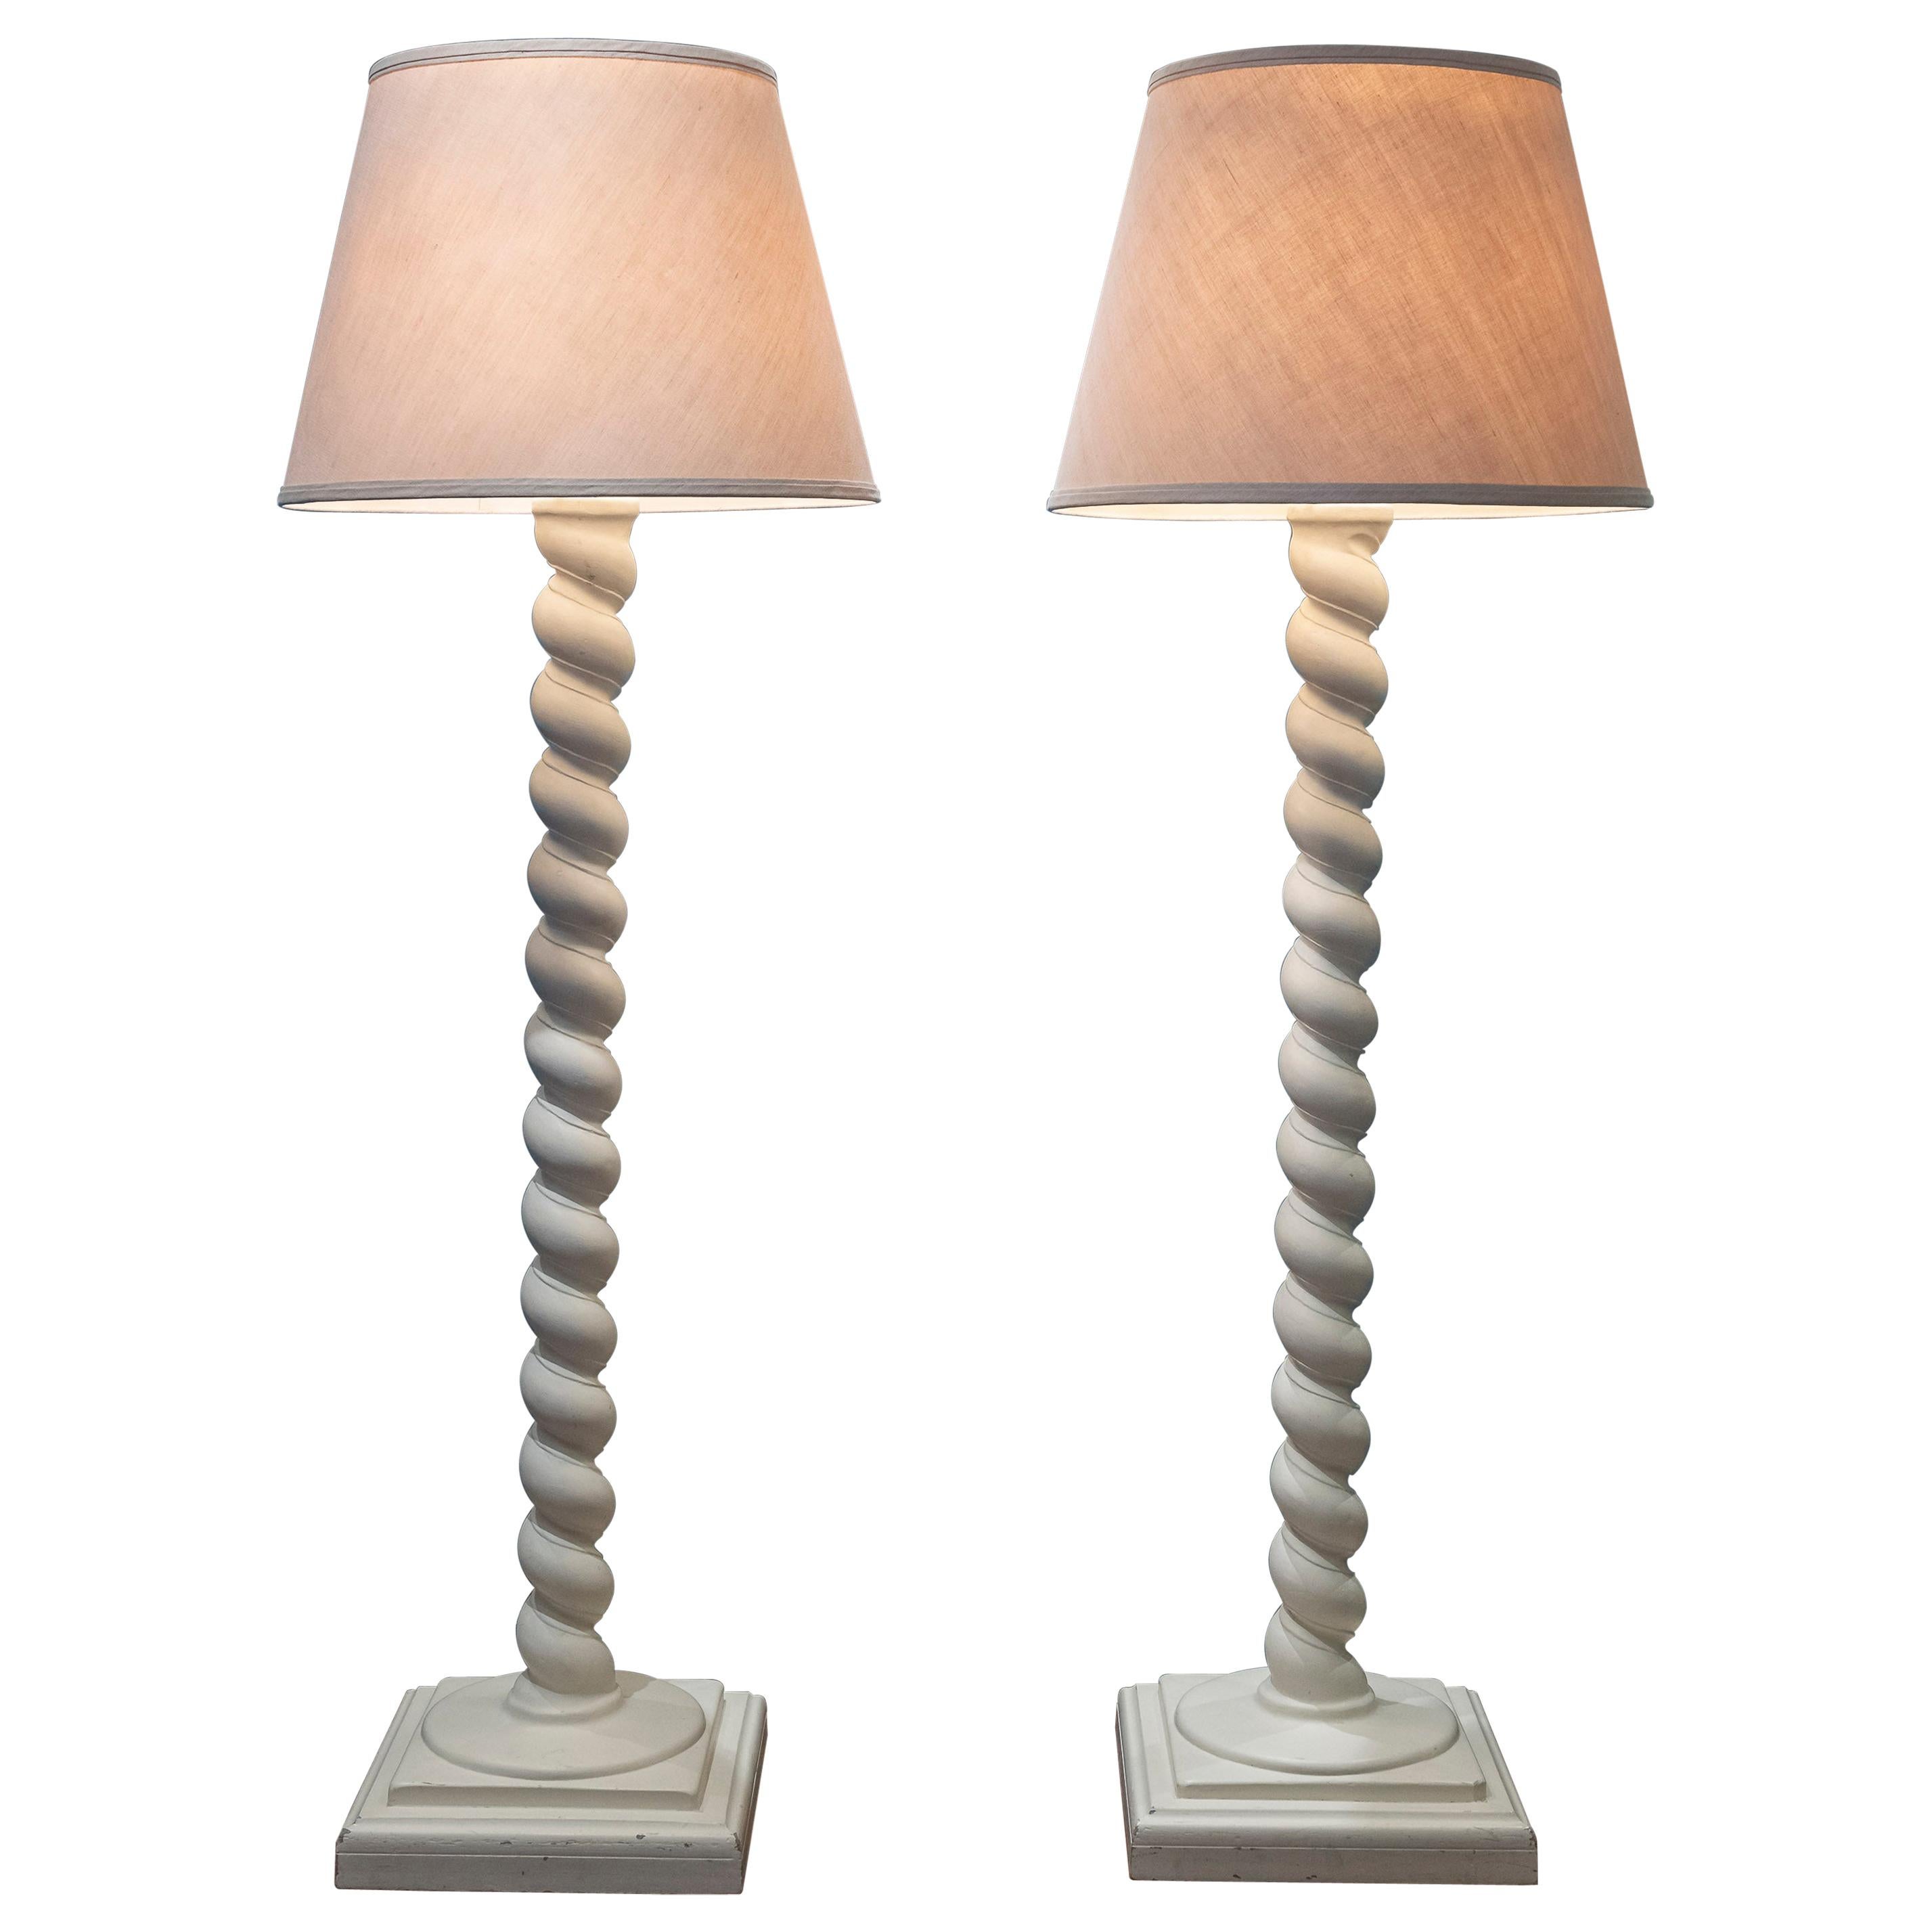 Architectural Plaster Floor Lamps after Michael Taylor